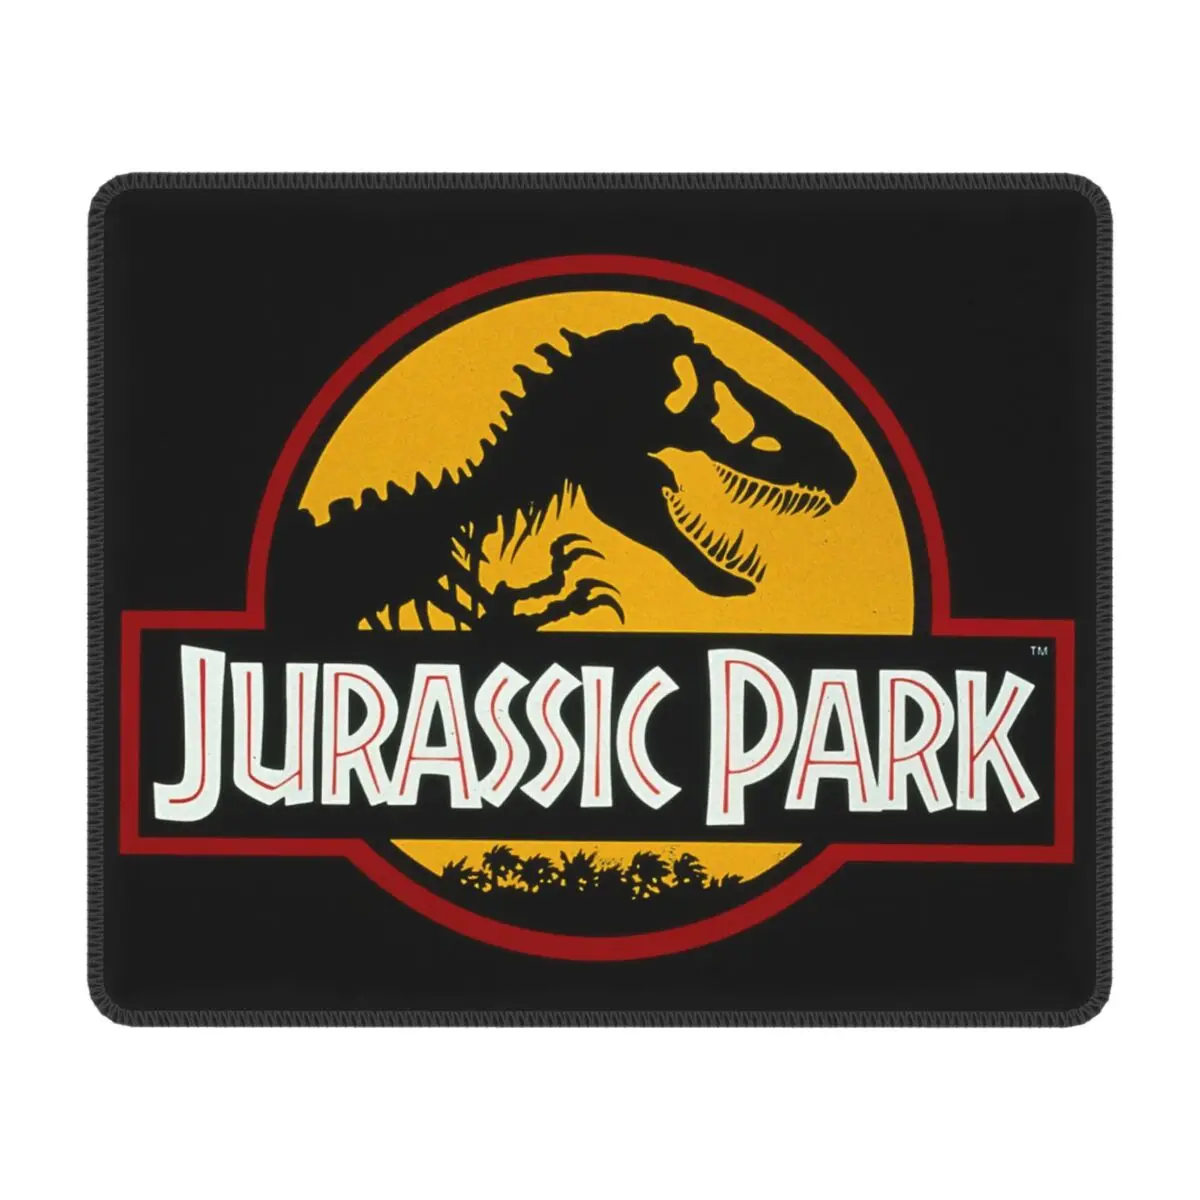 Jurassic Park Ancient Animal Computer Mouse Pads Soft Mousepad with Stitched Edges Rubber Giant Dinsaur Mouse Mat for Gaming